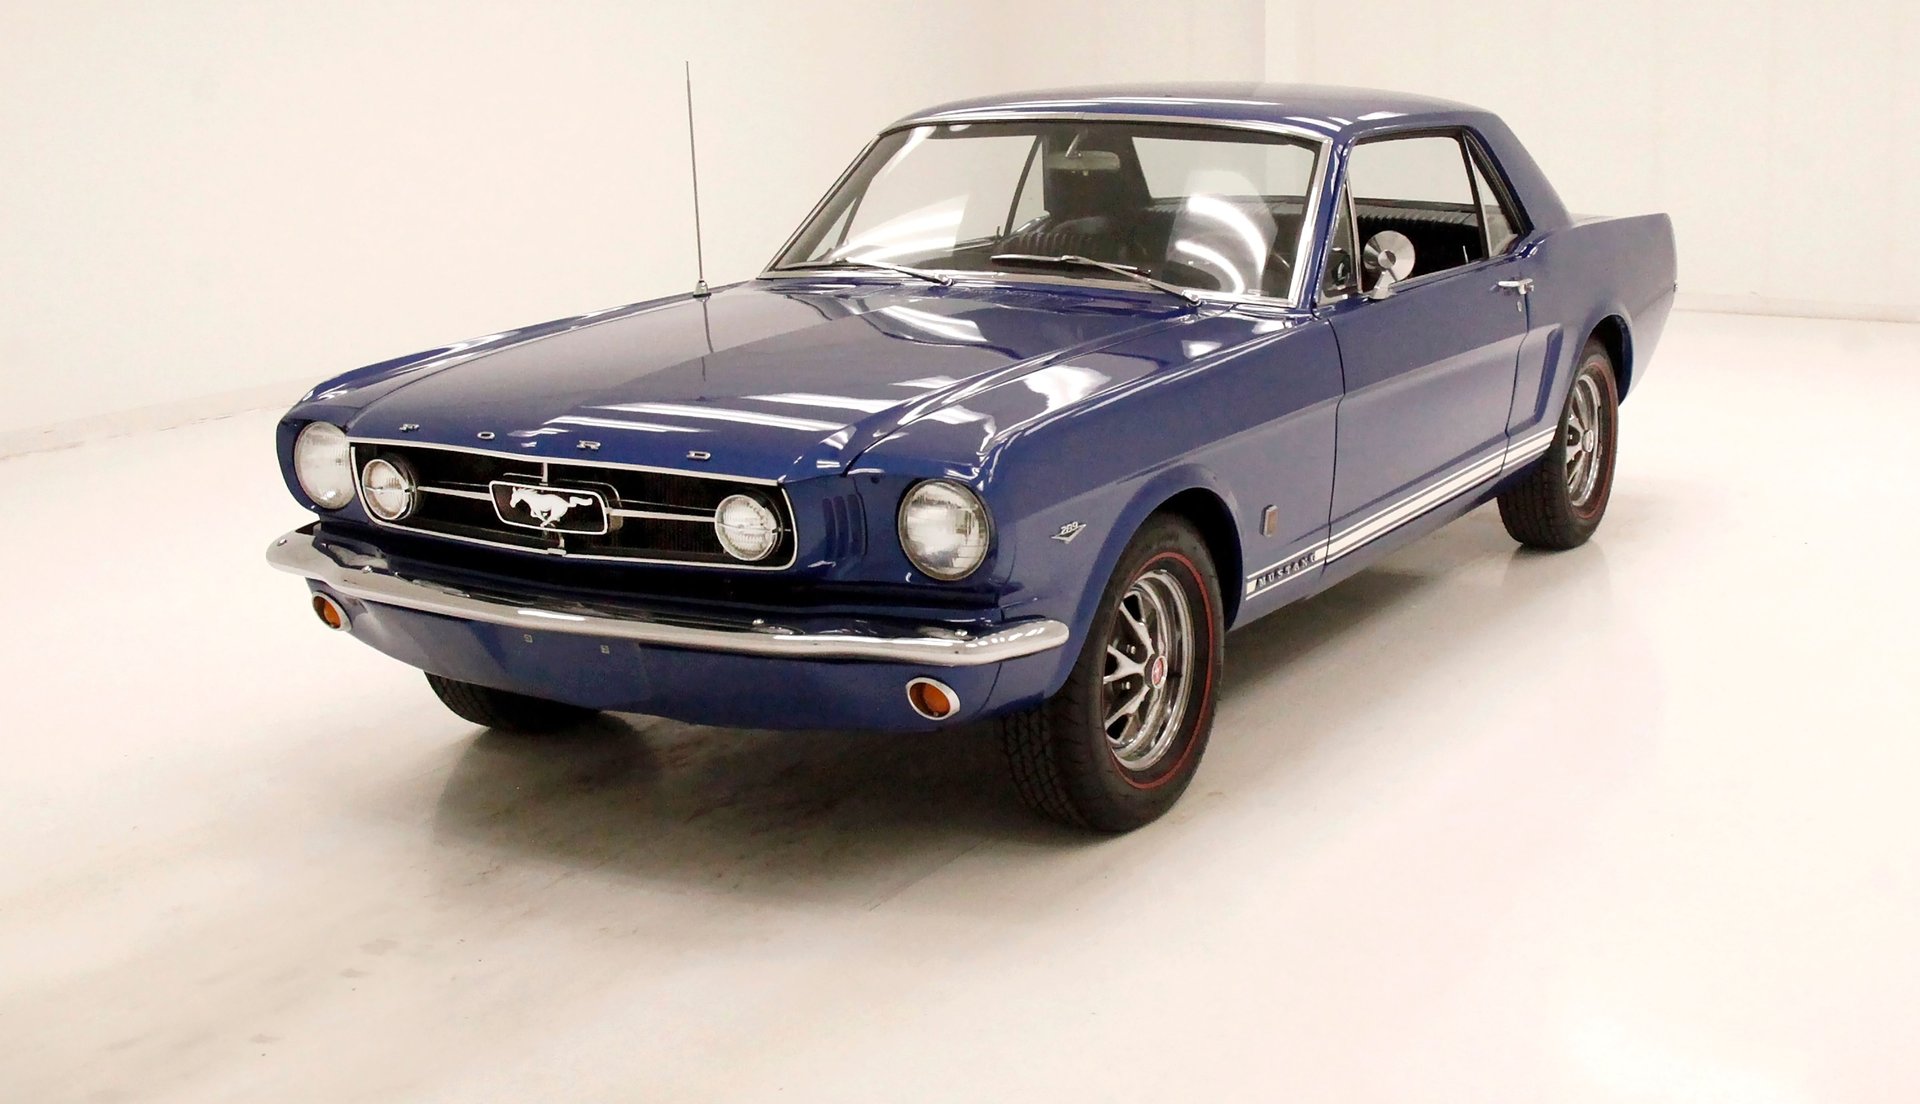 1965 Ford Mustang | Classic Auto Mall